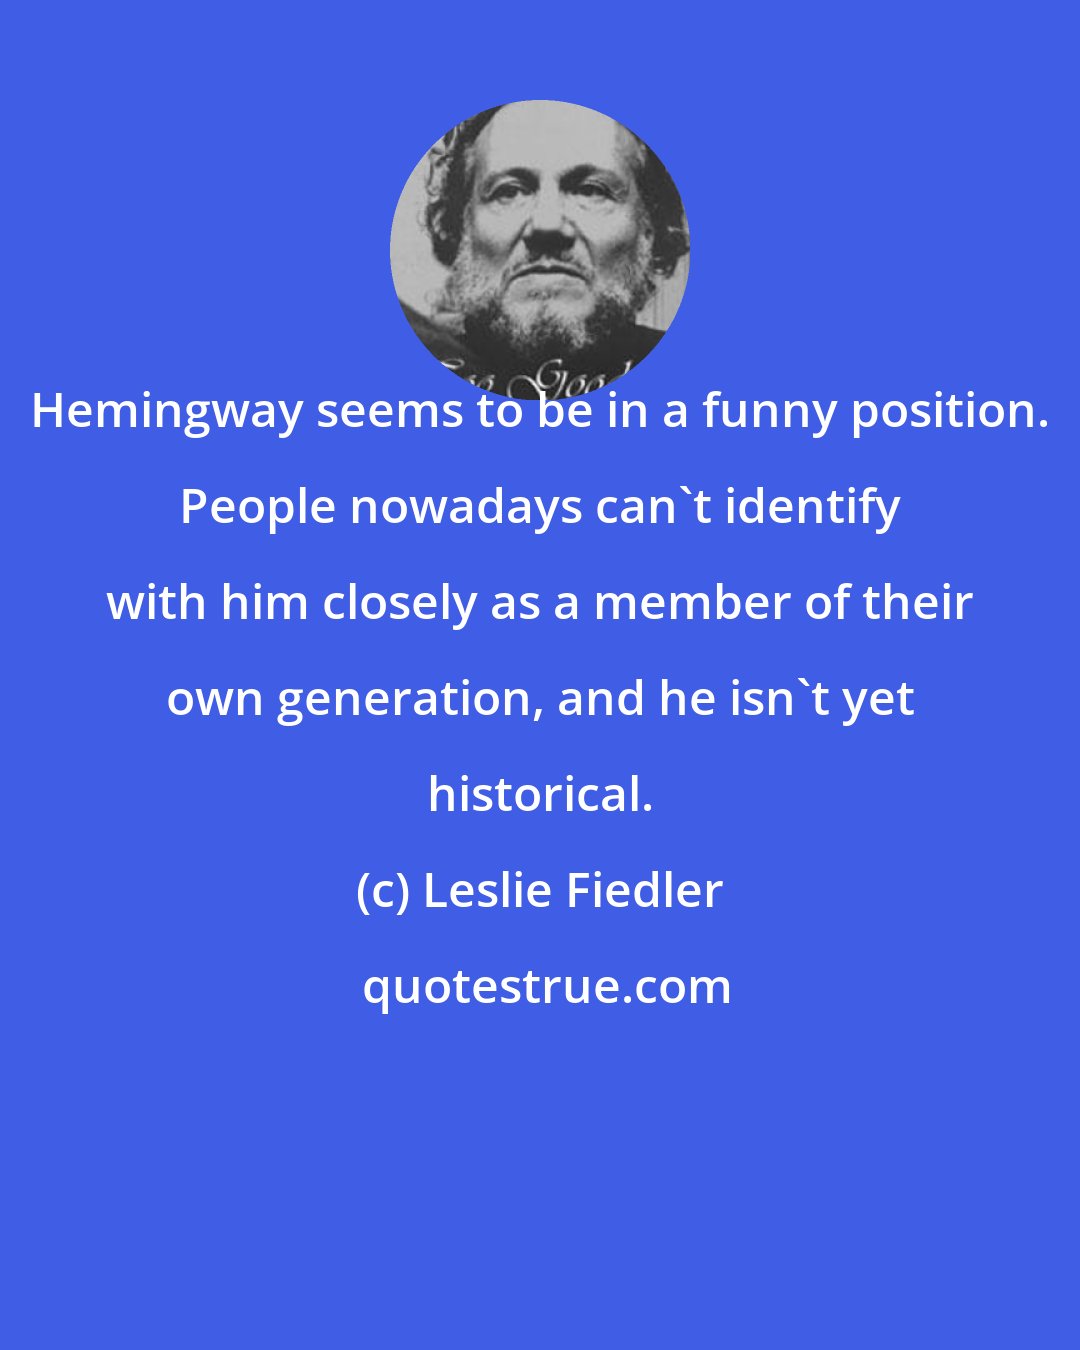 Leslie Fiedler: Hemingway seems to be in a funny position. People nowadays can't identify with him closely as a member of their own generation, and he isn't yet historical.